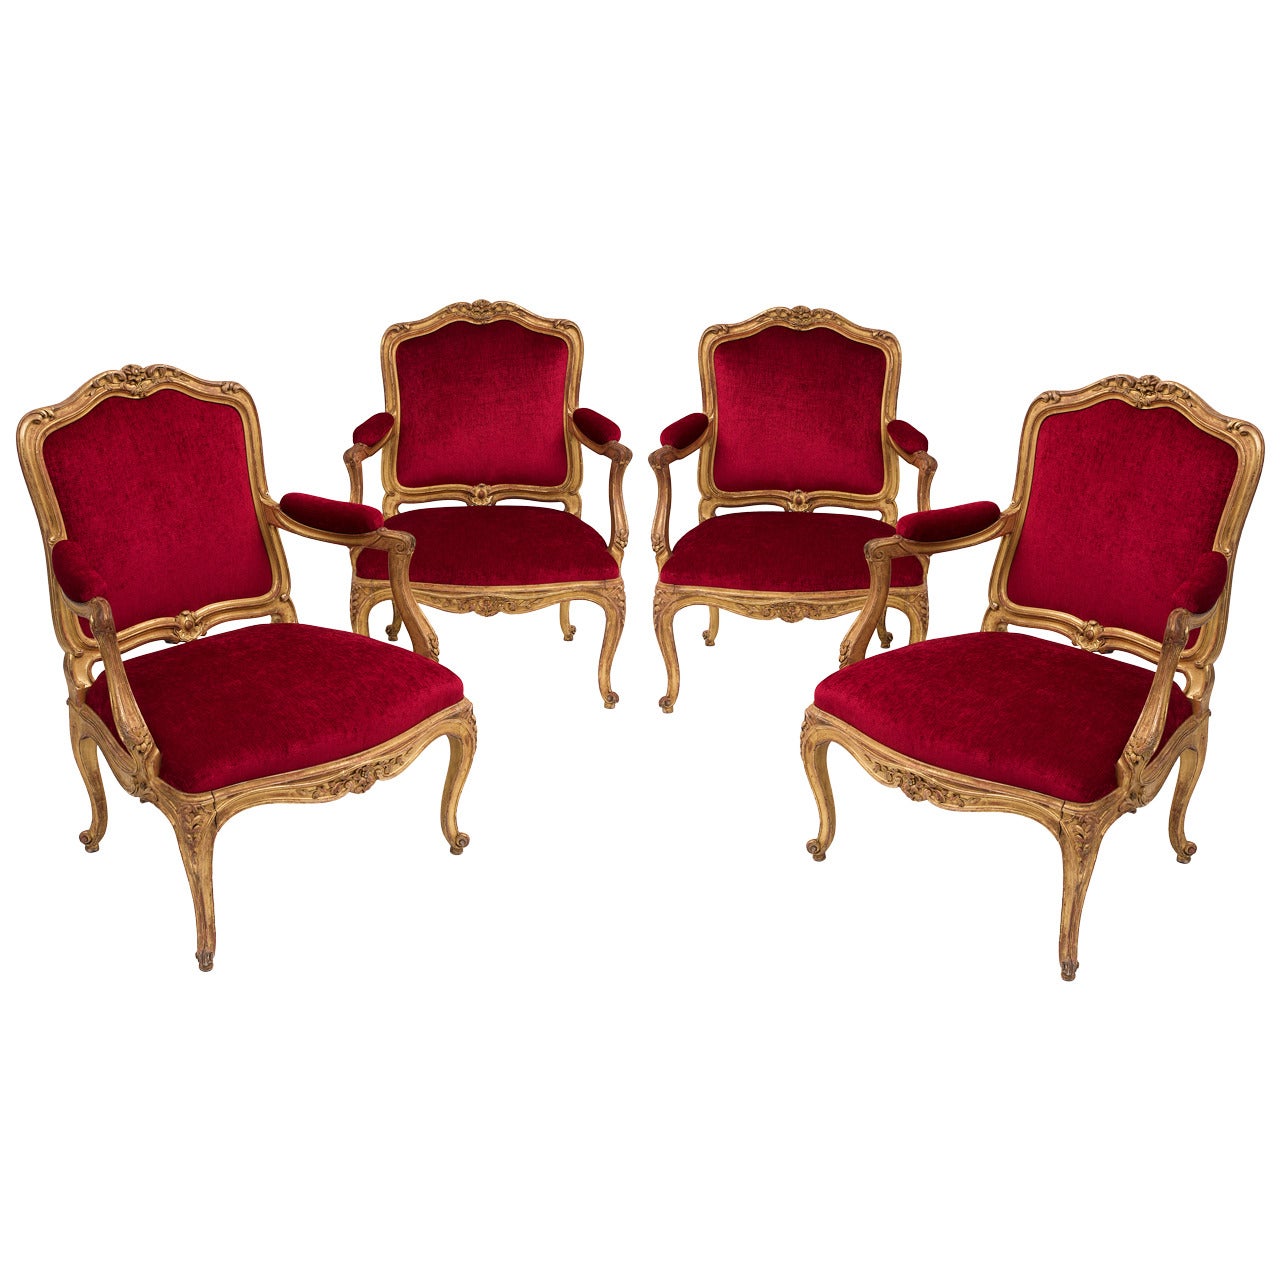 Set of Four Glamorous French Louis XV Style Carved Giltwood Armchairs